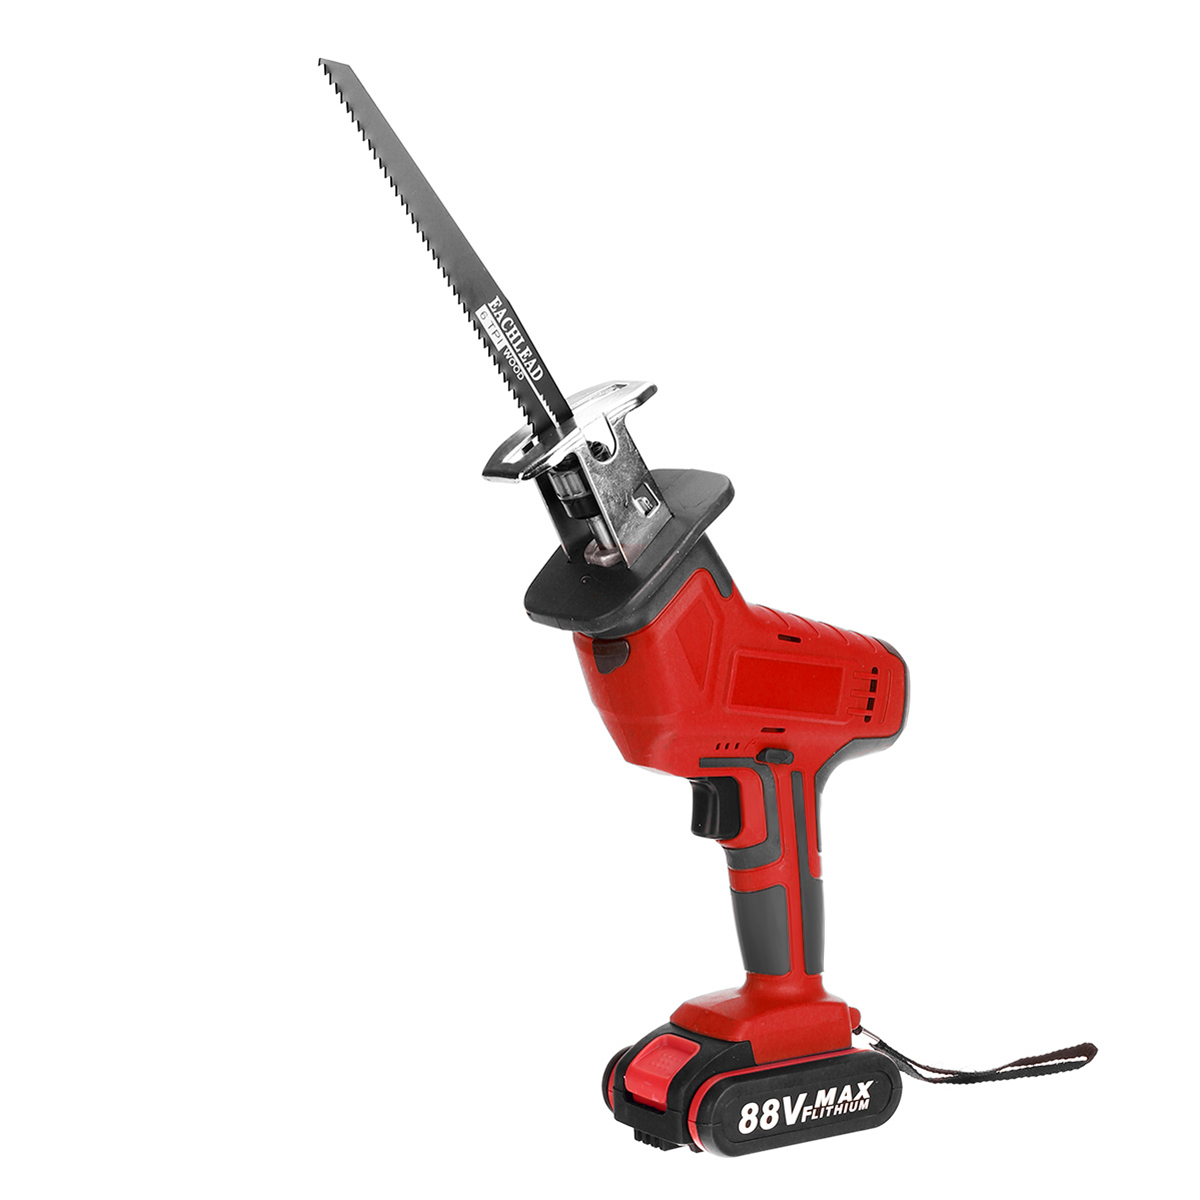 88VF-3000RPM-Rechargeable-Electric-Saw-Branches-Metal-Wood-Sawing-Cutting-Tool-1765732-2